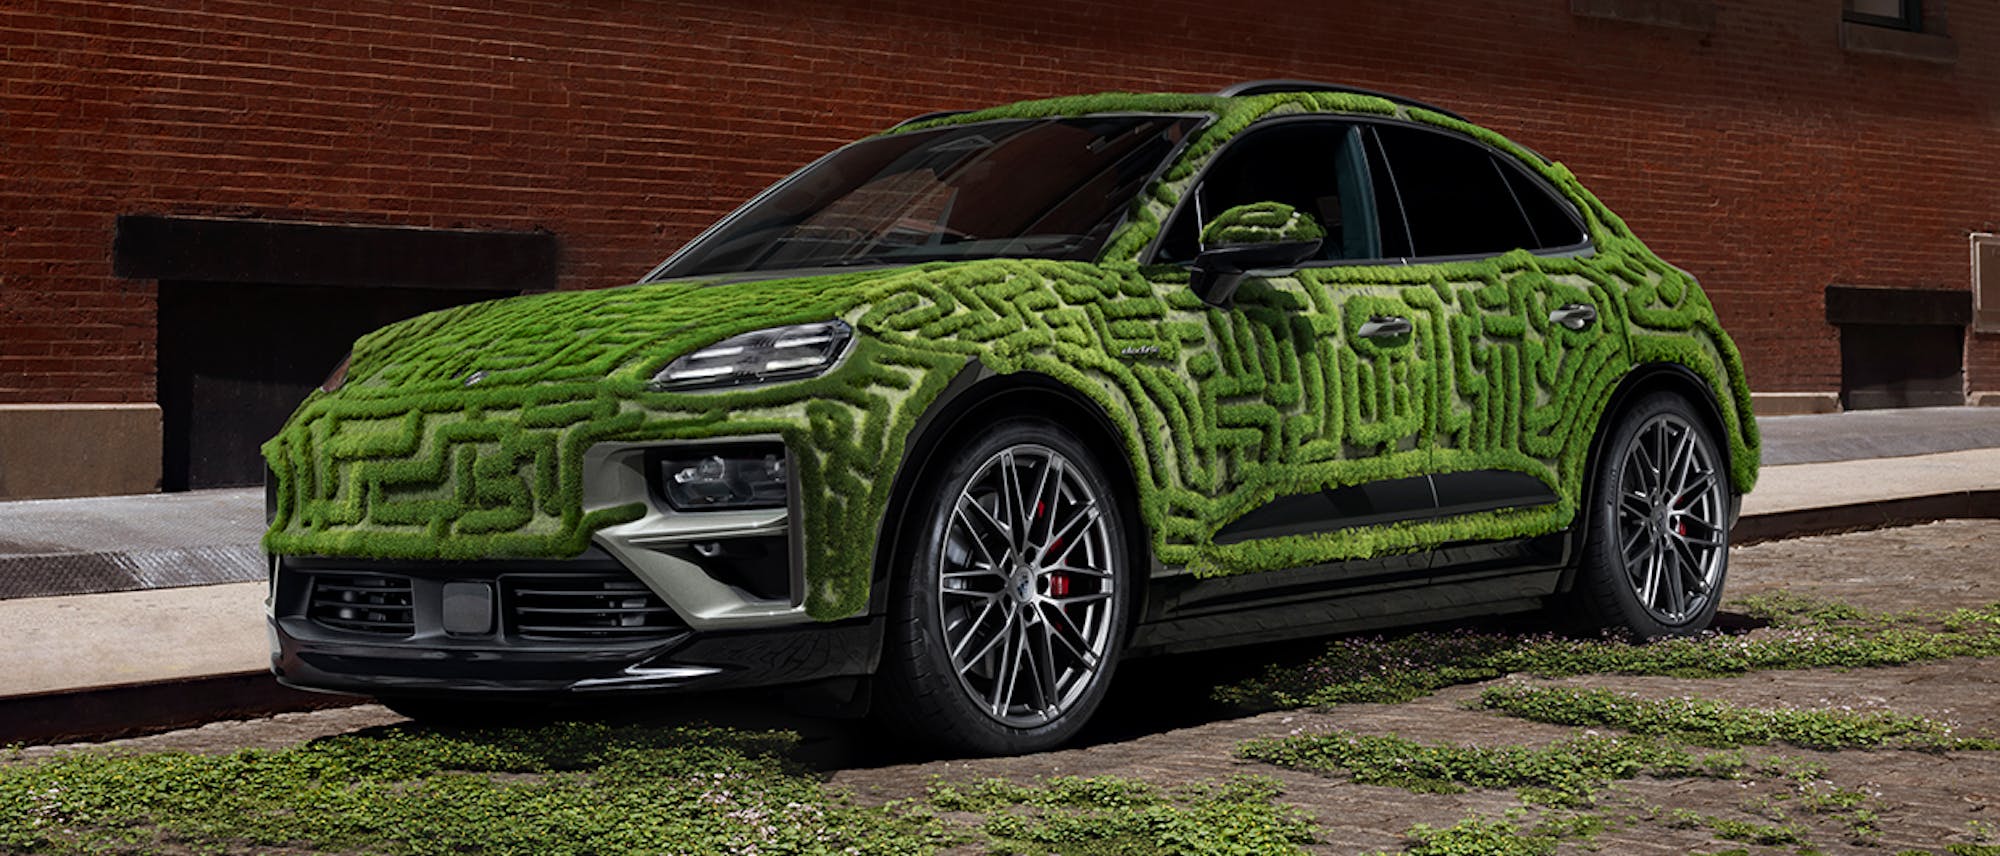 Porsche Macan covered in green moss, in front of brick building